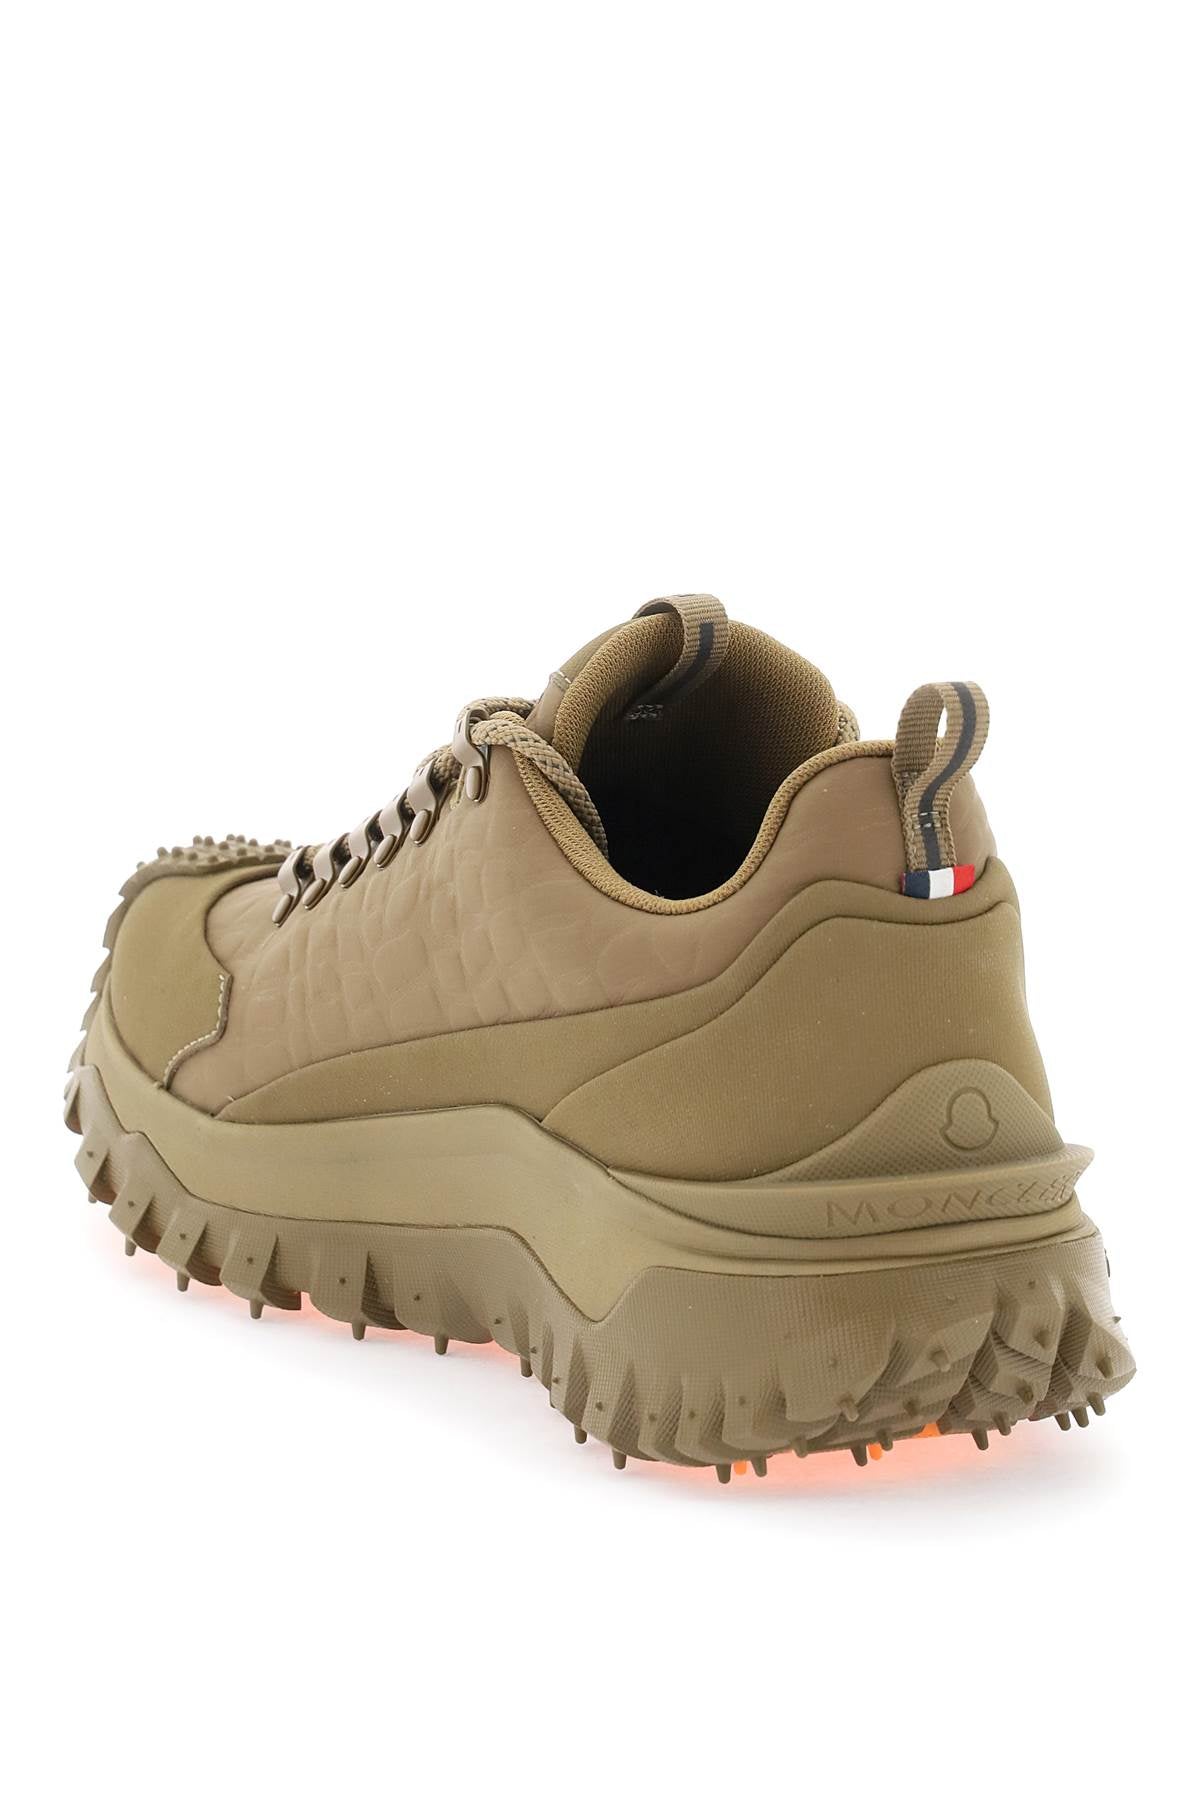 MONCLER X ROC NATION BY JAY Z Men's Trailgrip Trainer - Jay-Z Designed Beige Sneakers for FW23